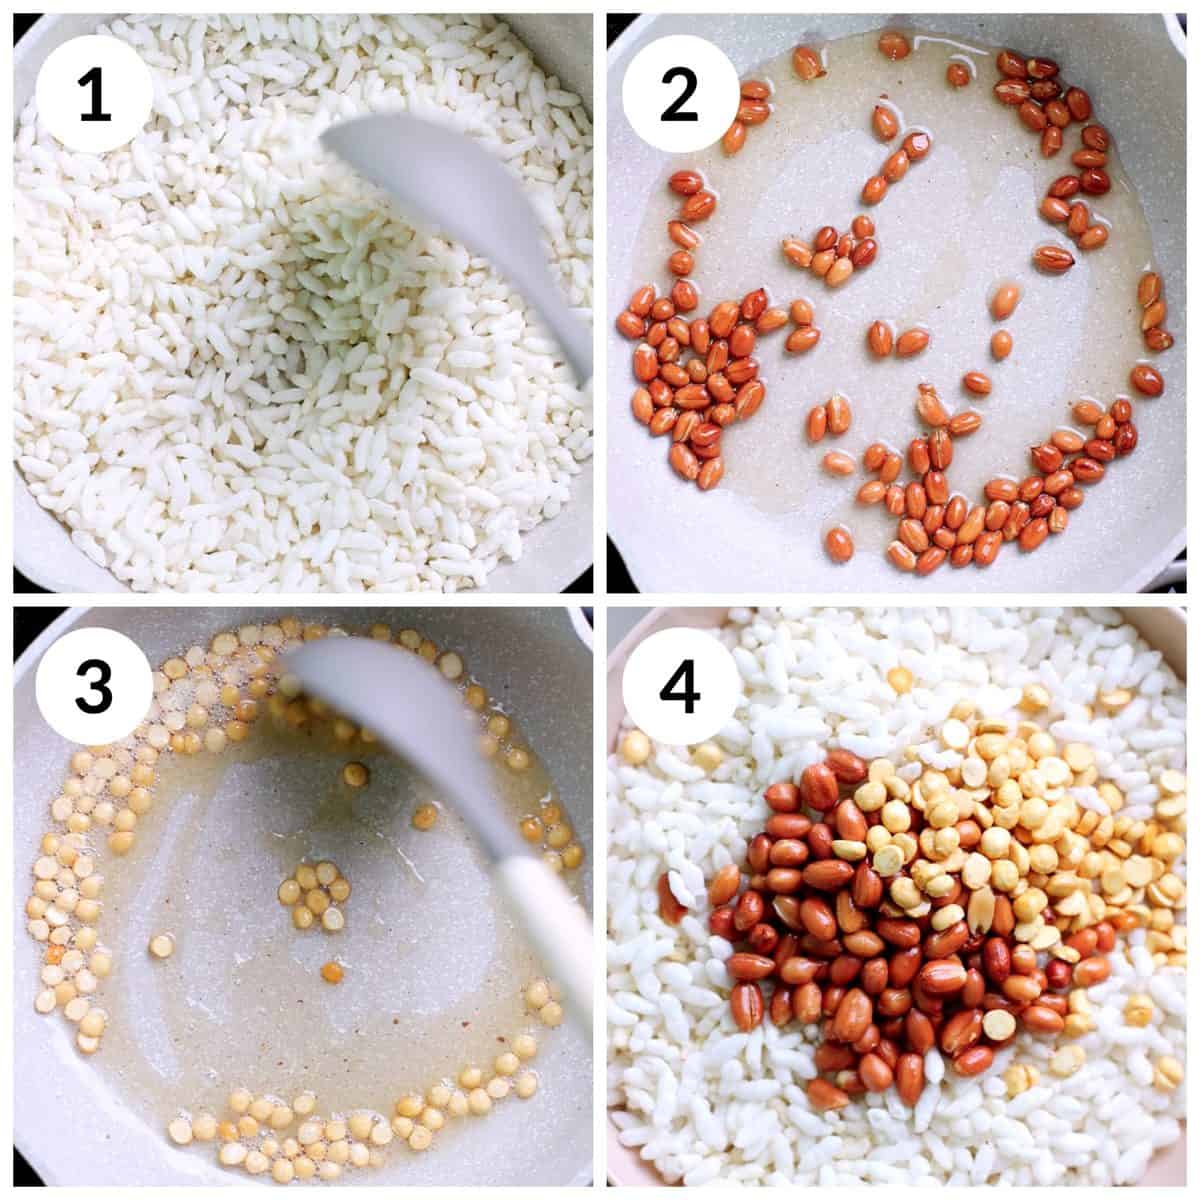 Steps for roasting the puffed rice, peanuts and split chickpeas